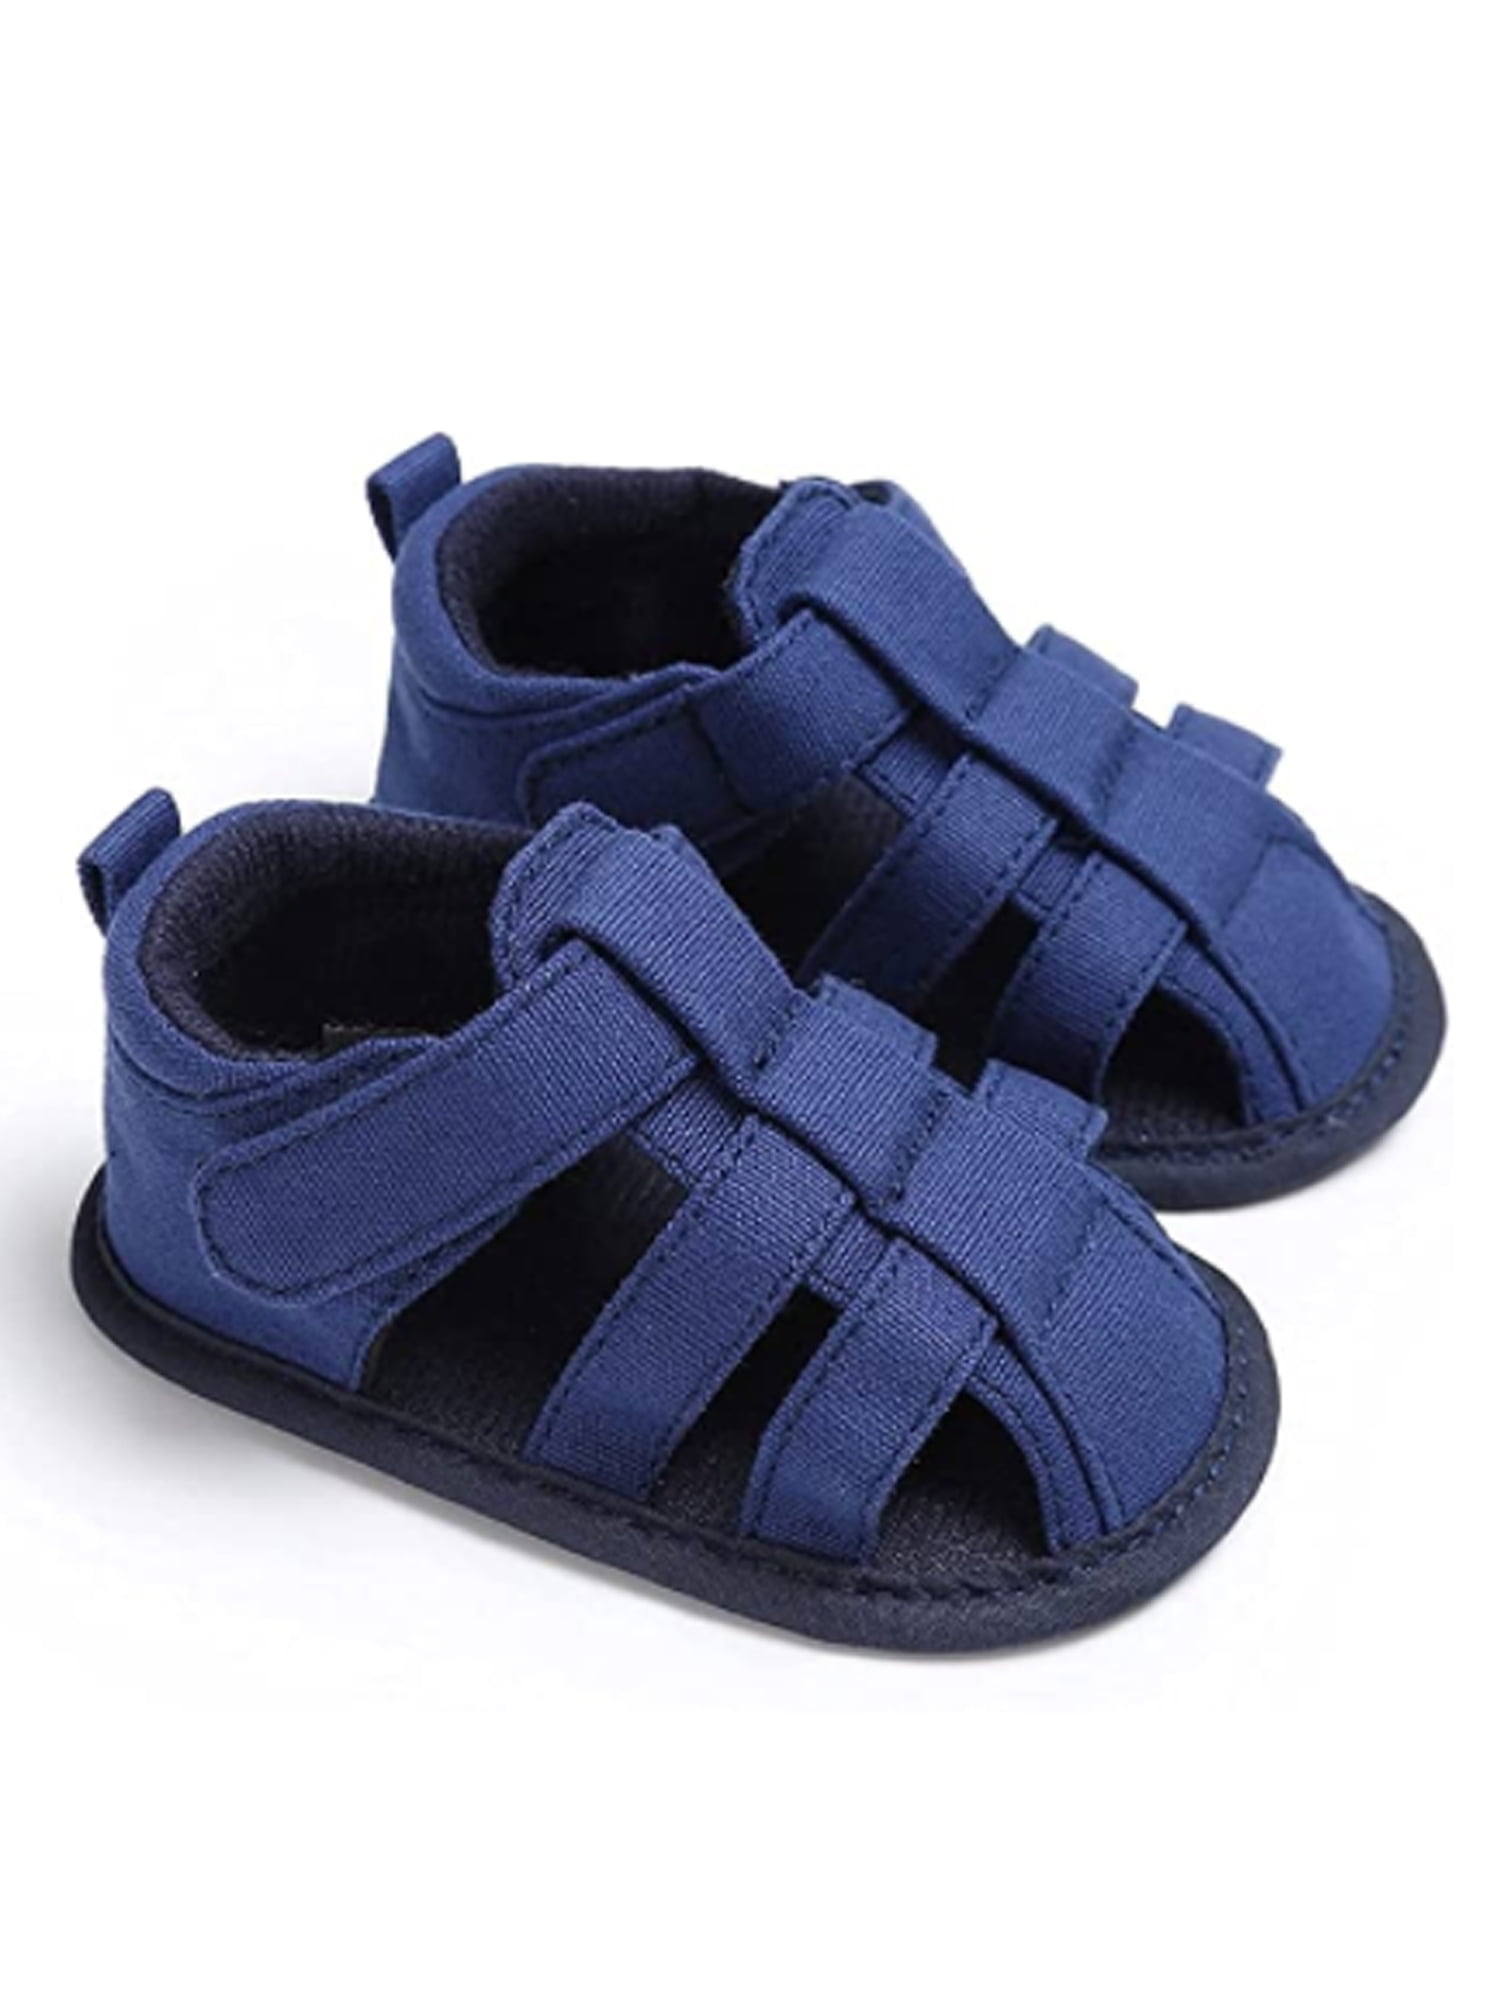 Baby Boys Girls Summer Sandals Canvas Soft Sole Non-Slip First Walkers Shoes 